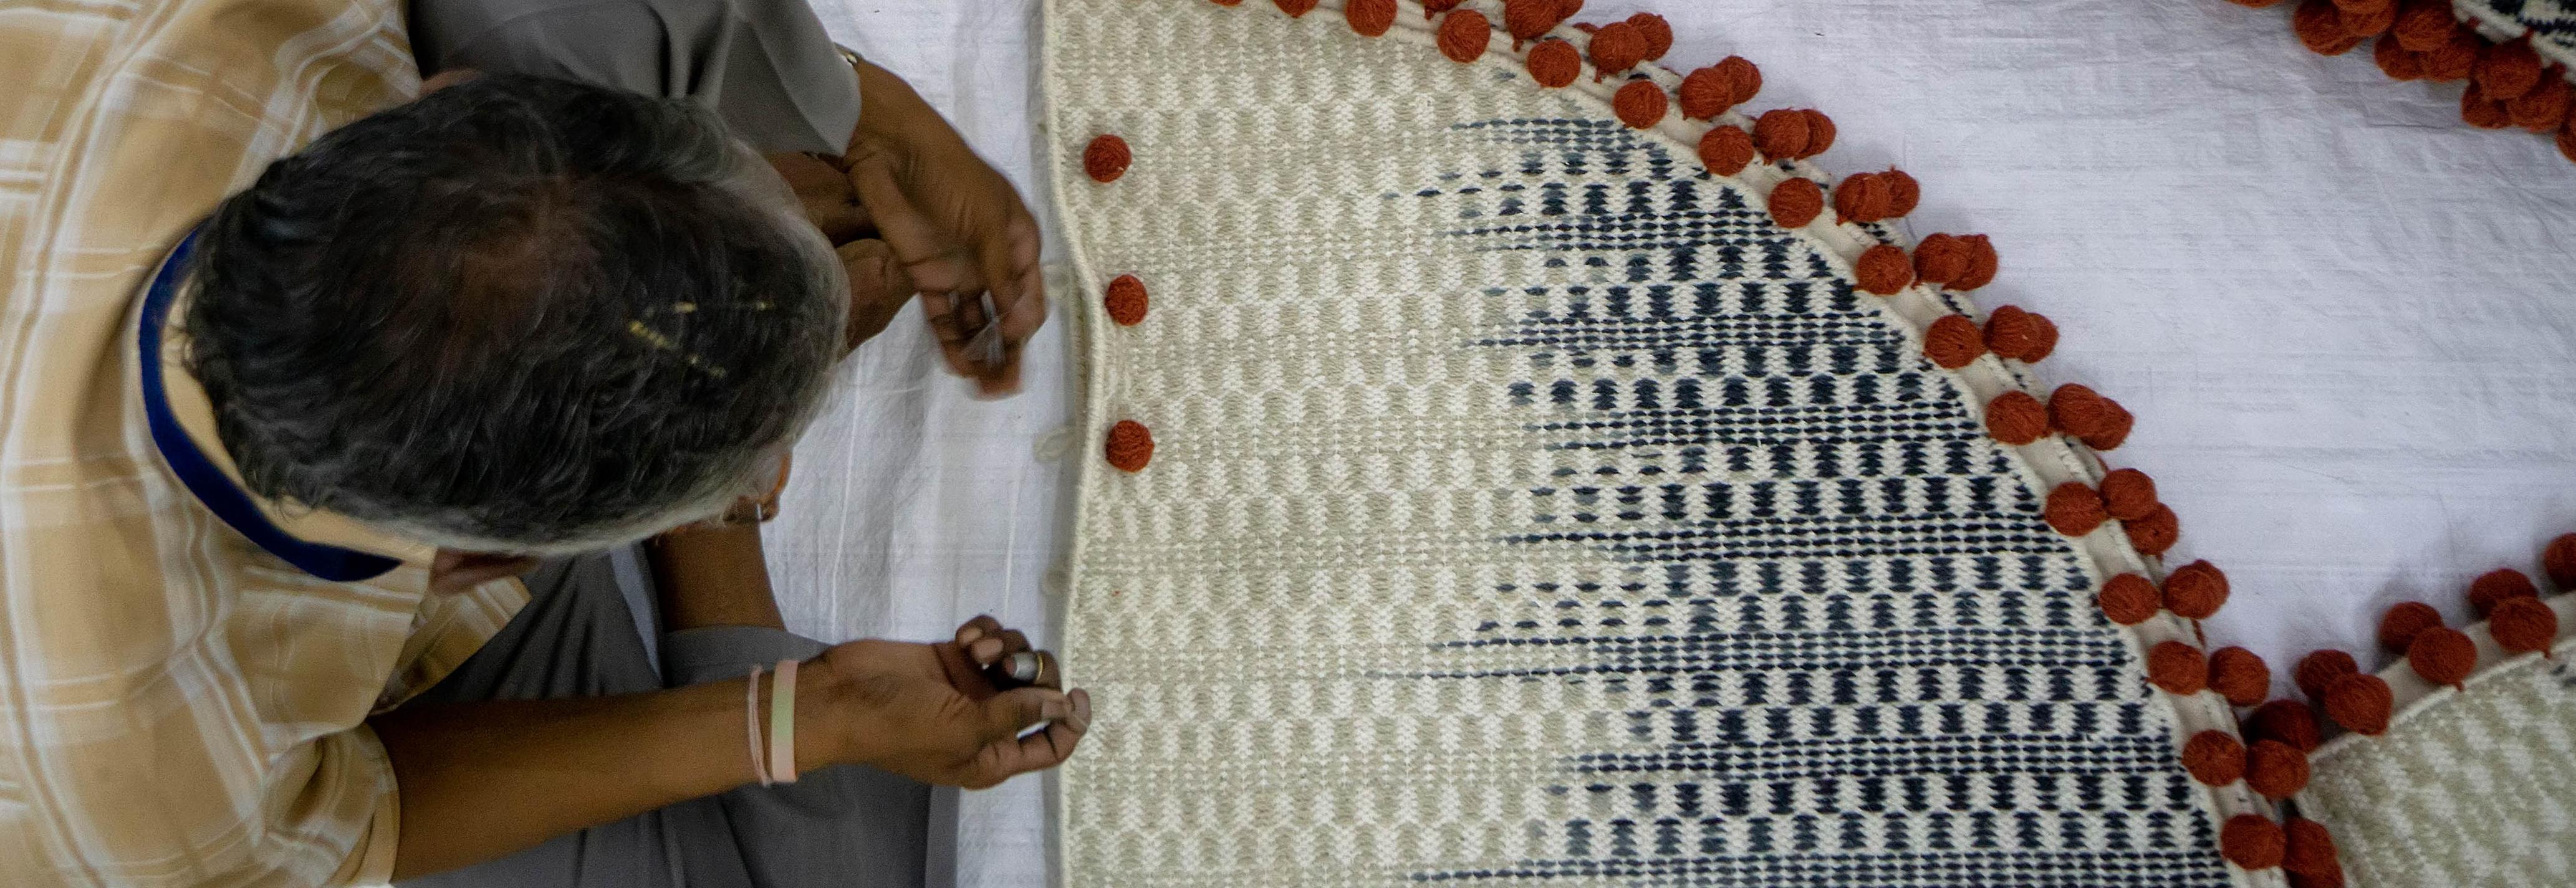 Man weaving on floor_Photographed by Nitin Gera © GoodWeave